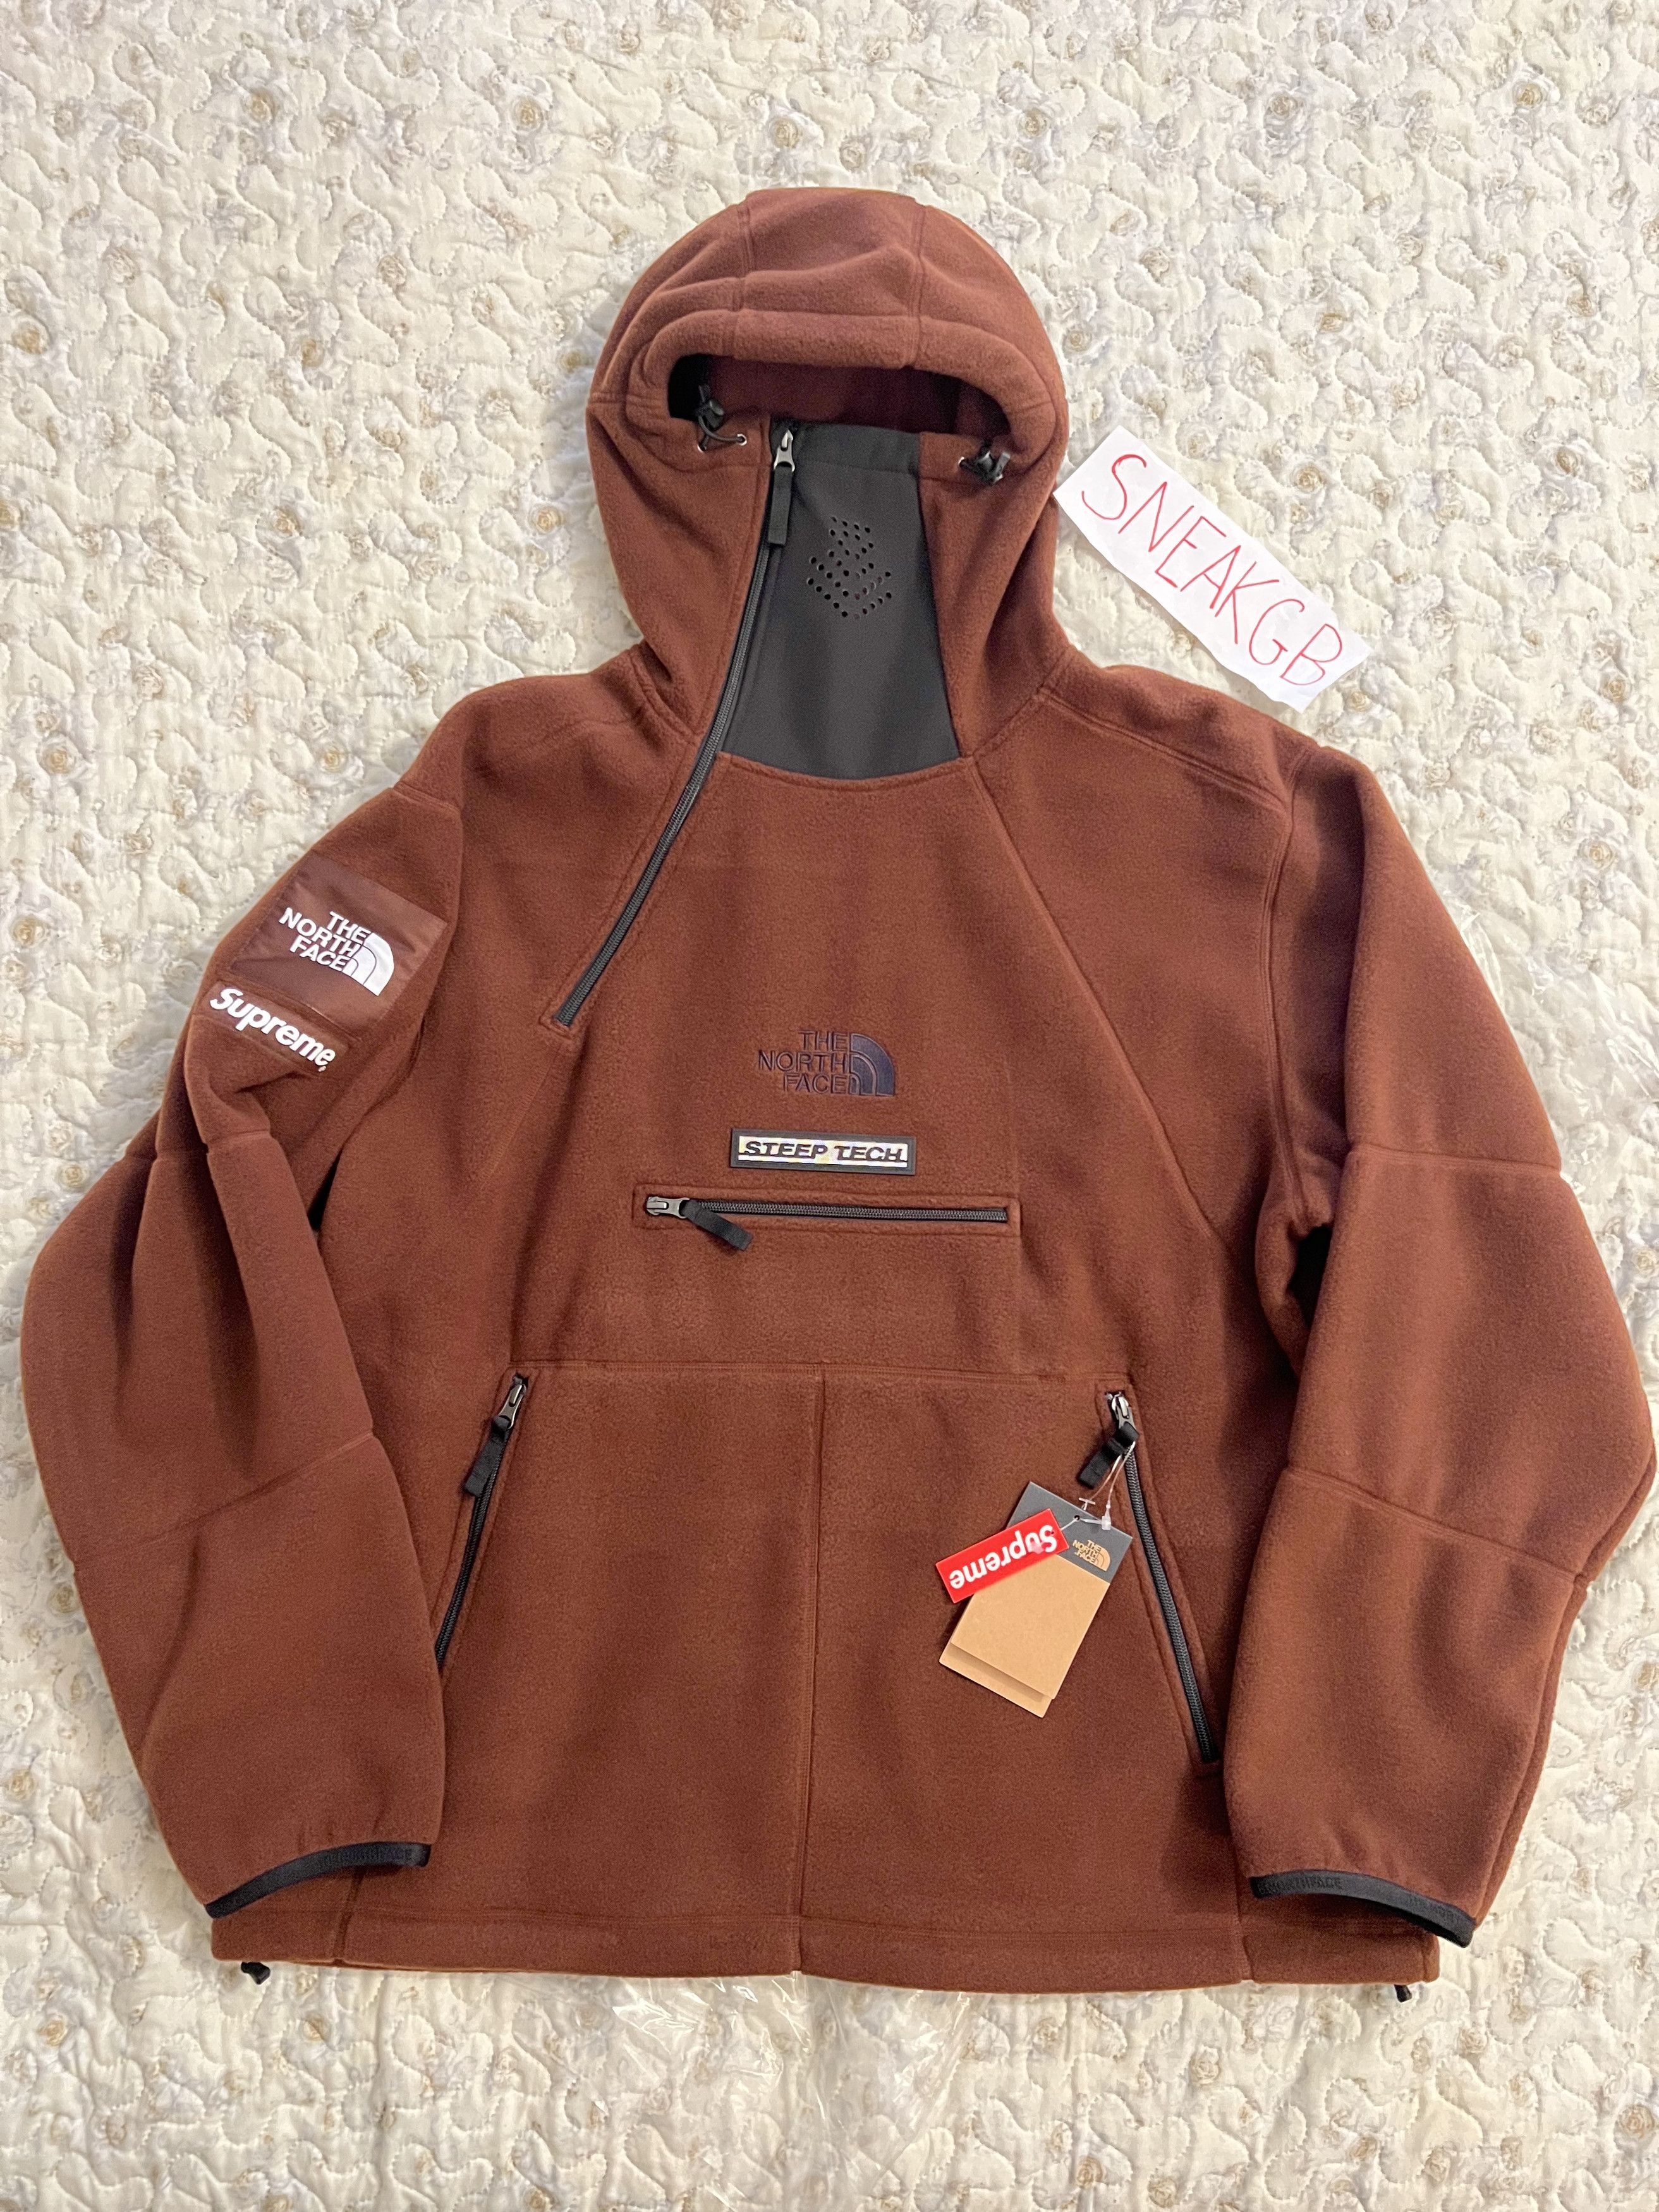 SUPREME/ THE NORTH FACE STEEP TECH FLEECE PULLOVER/ BROWN/ SIZE LARGE/ FW22